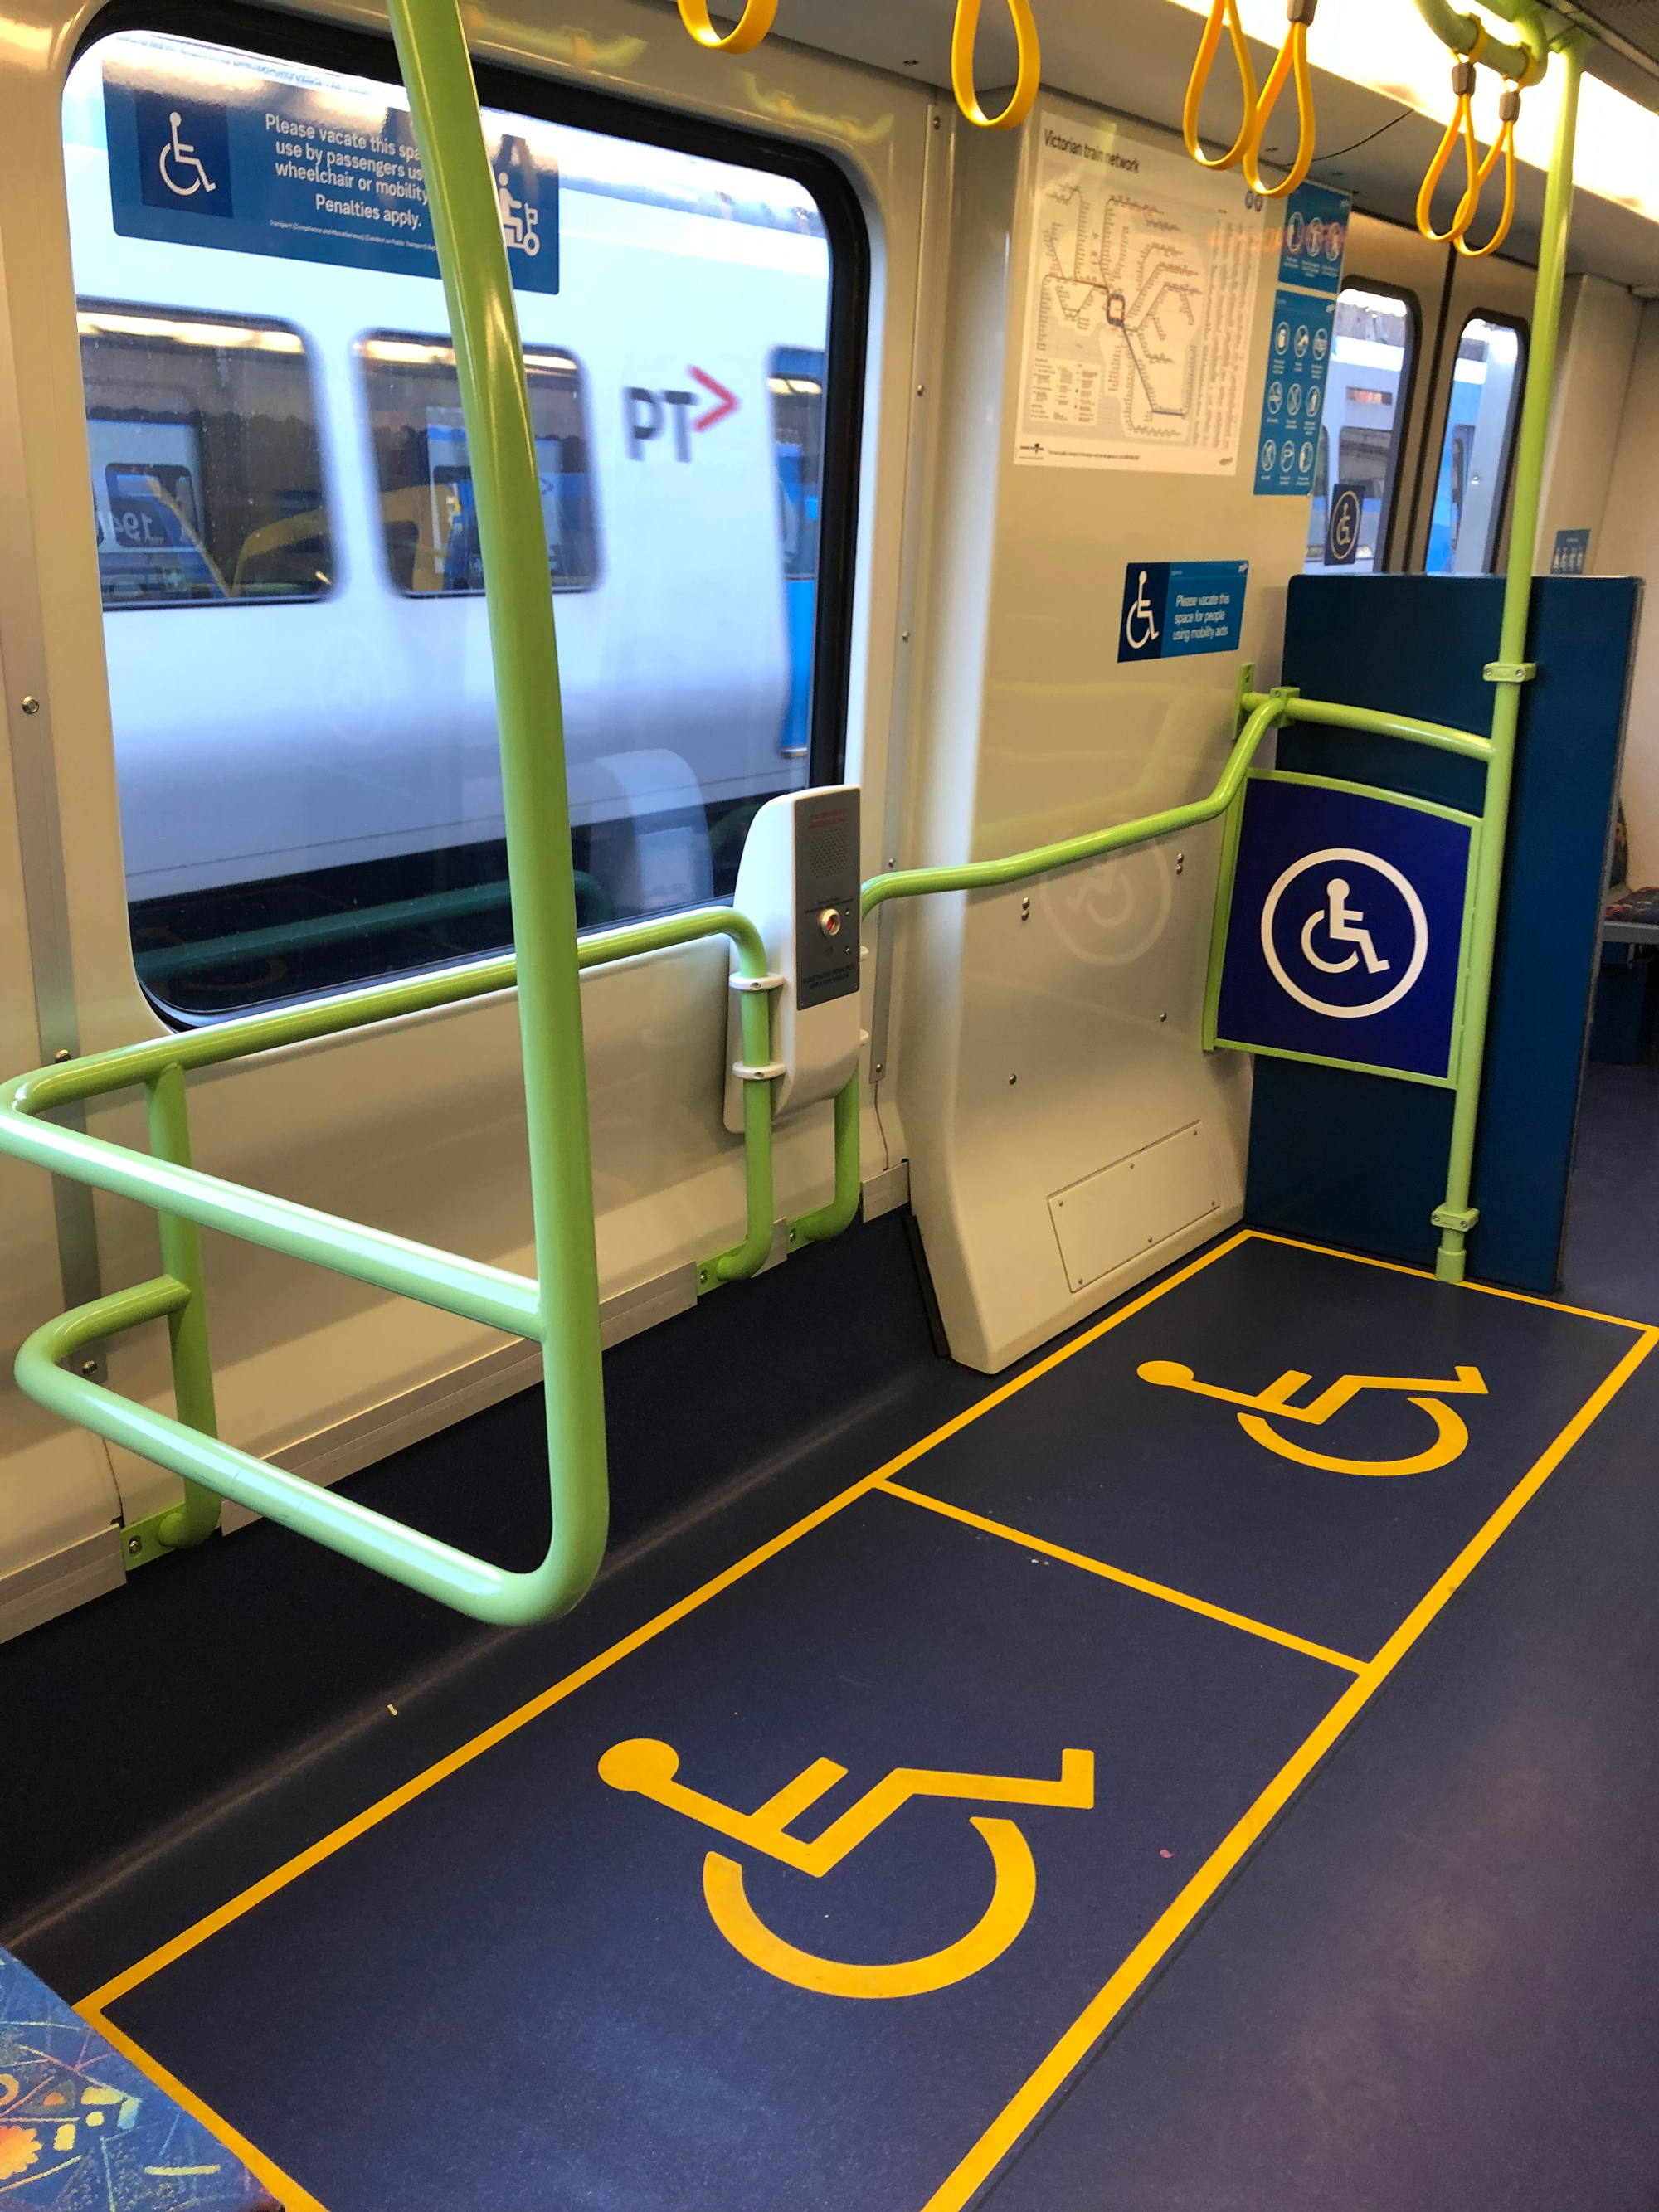 Photo of allocated spaces for wheelchairs in a train carriage 